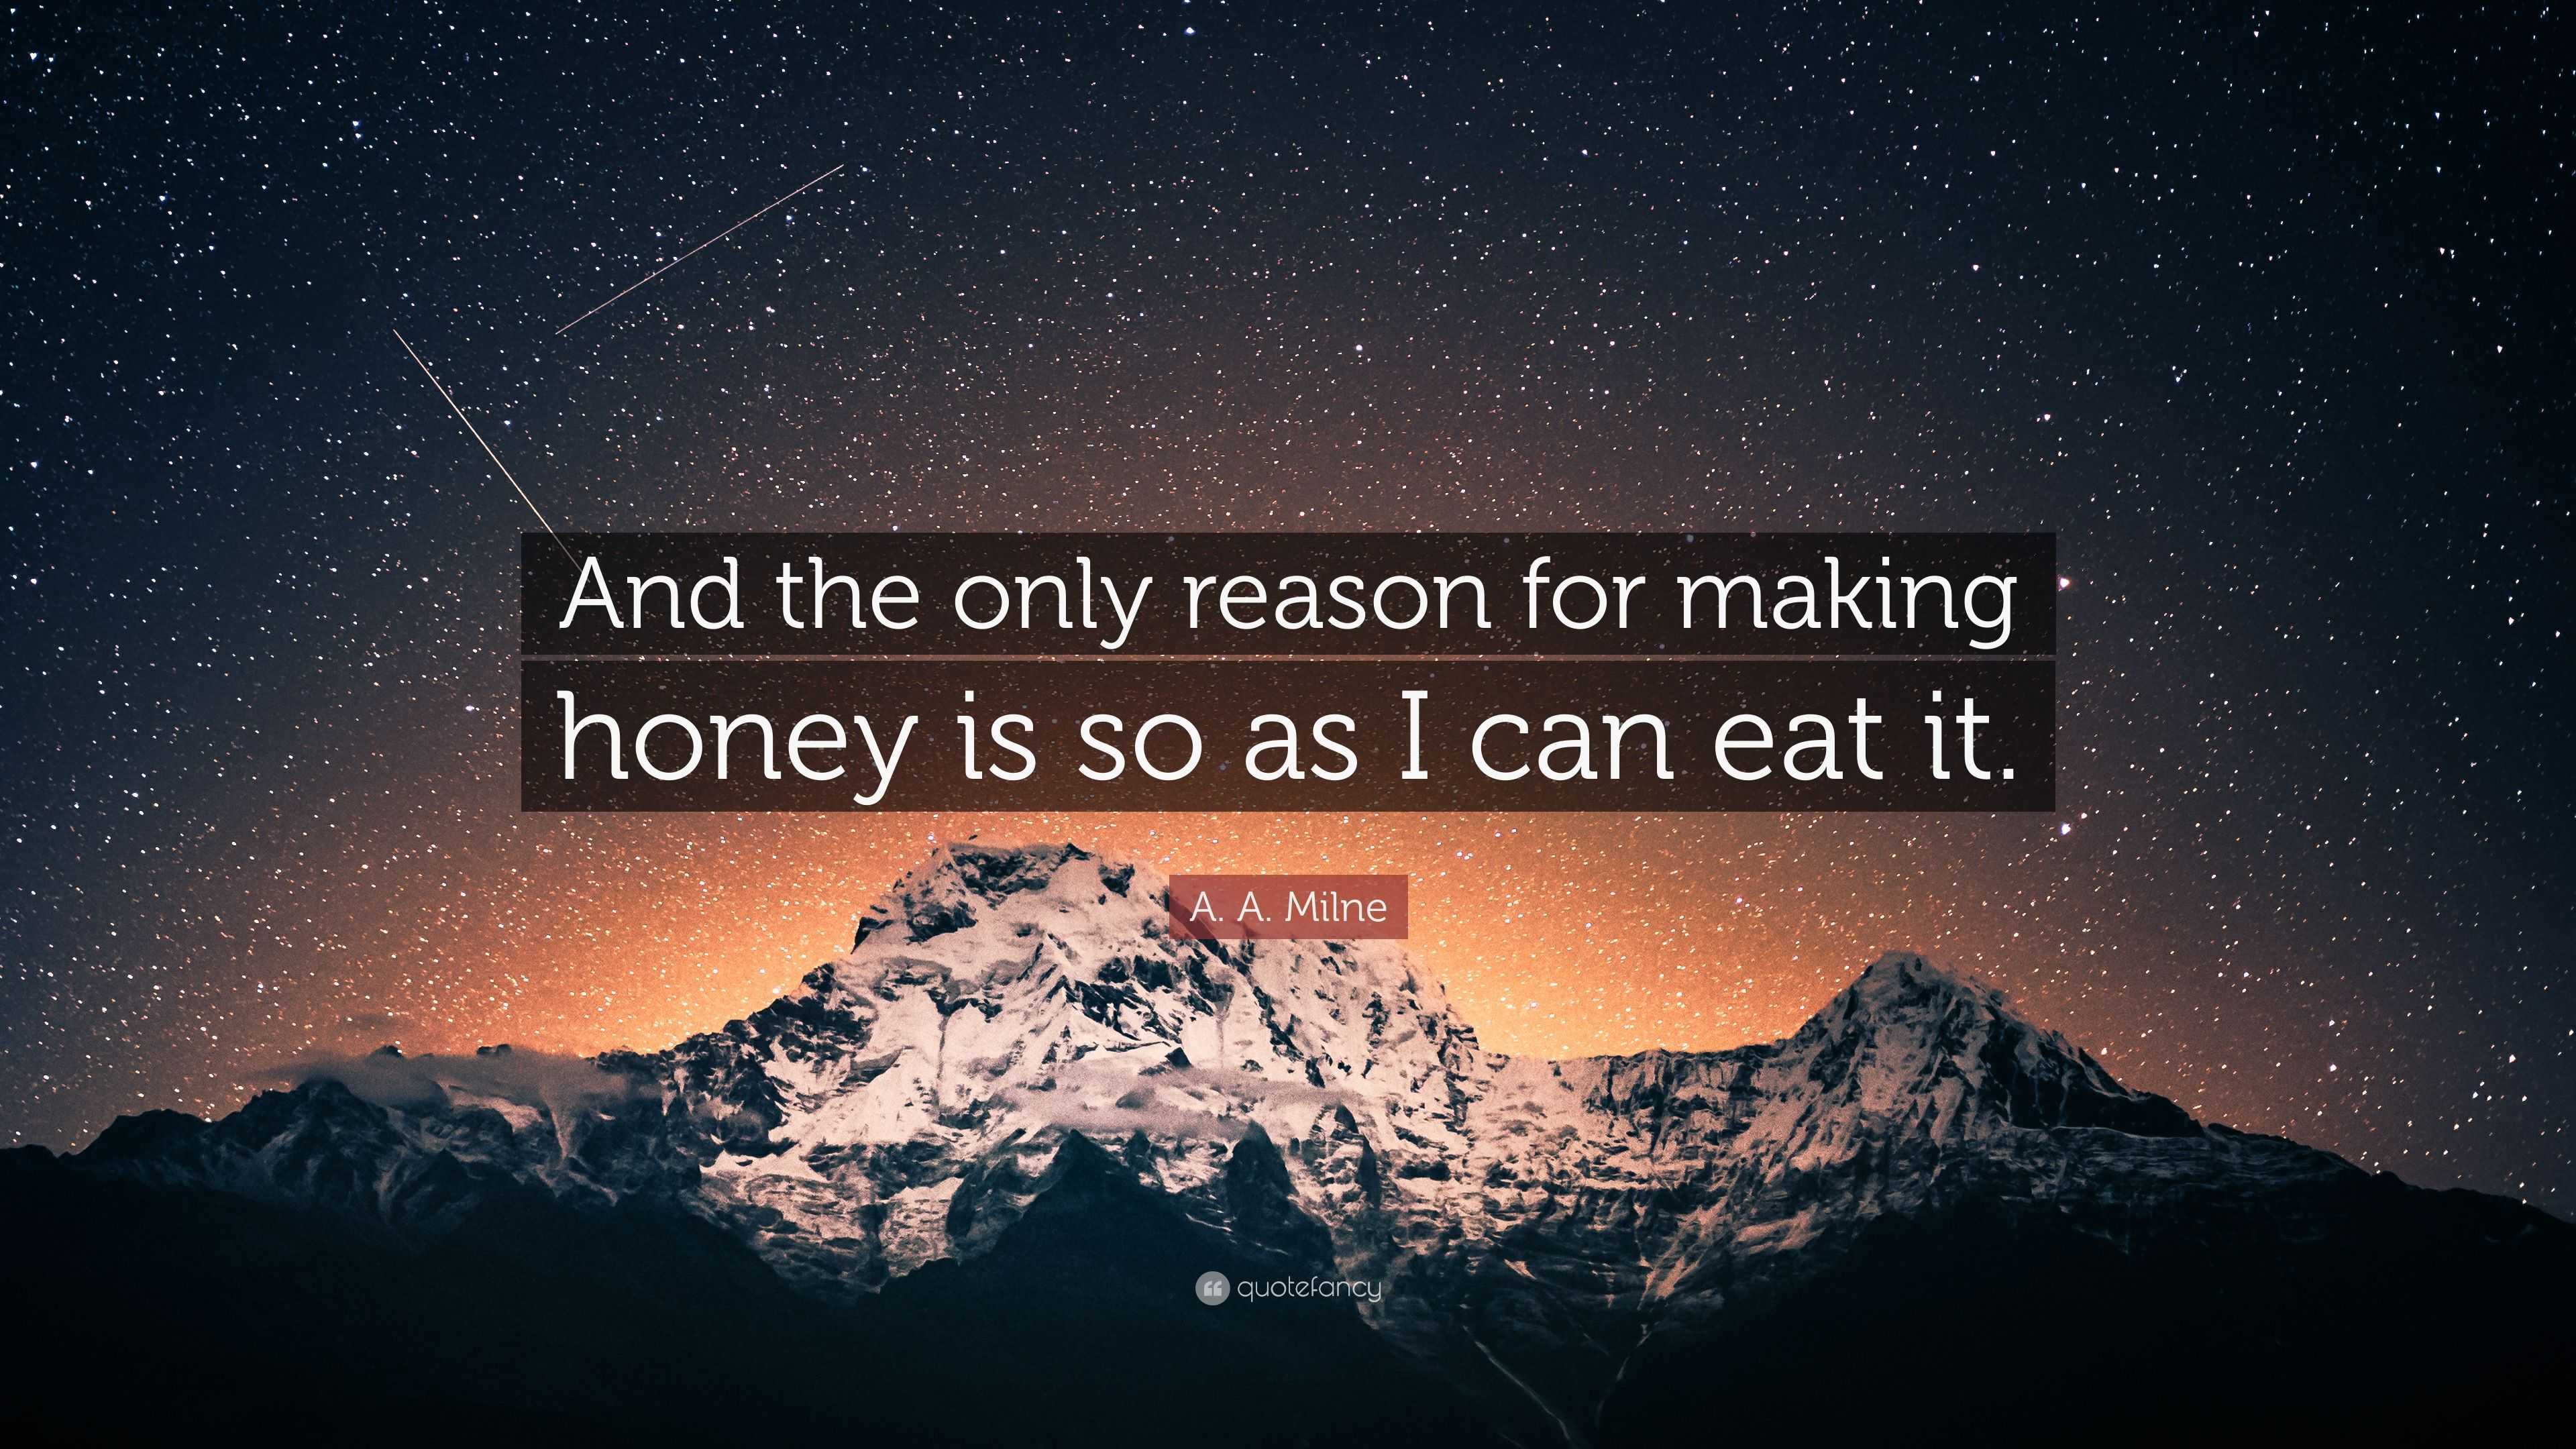 A A Milne Quote “and The Only Reason For Making Honey Is So As I Can Eat It” 1746